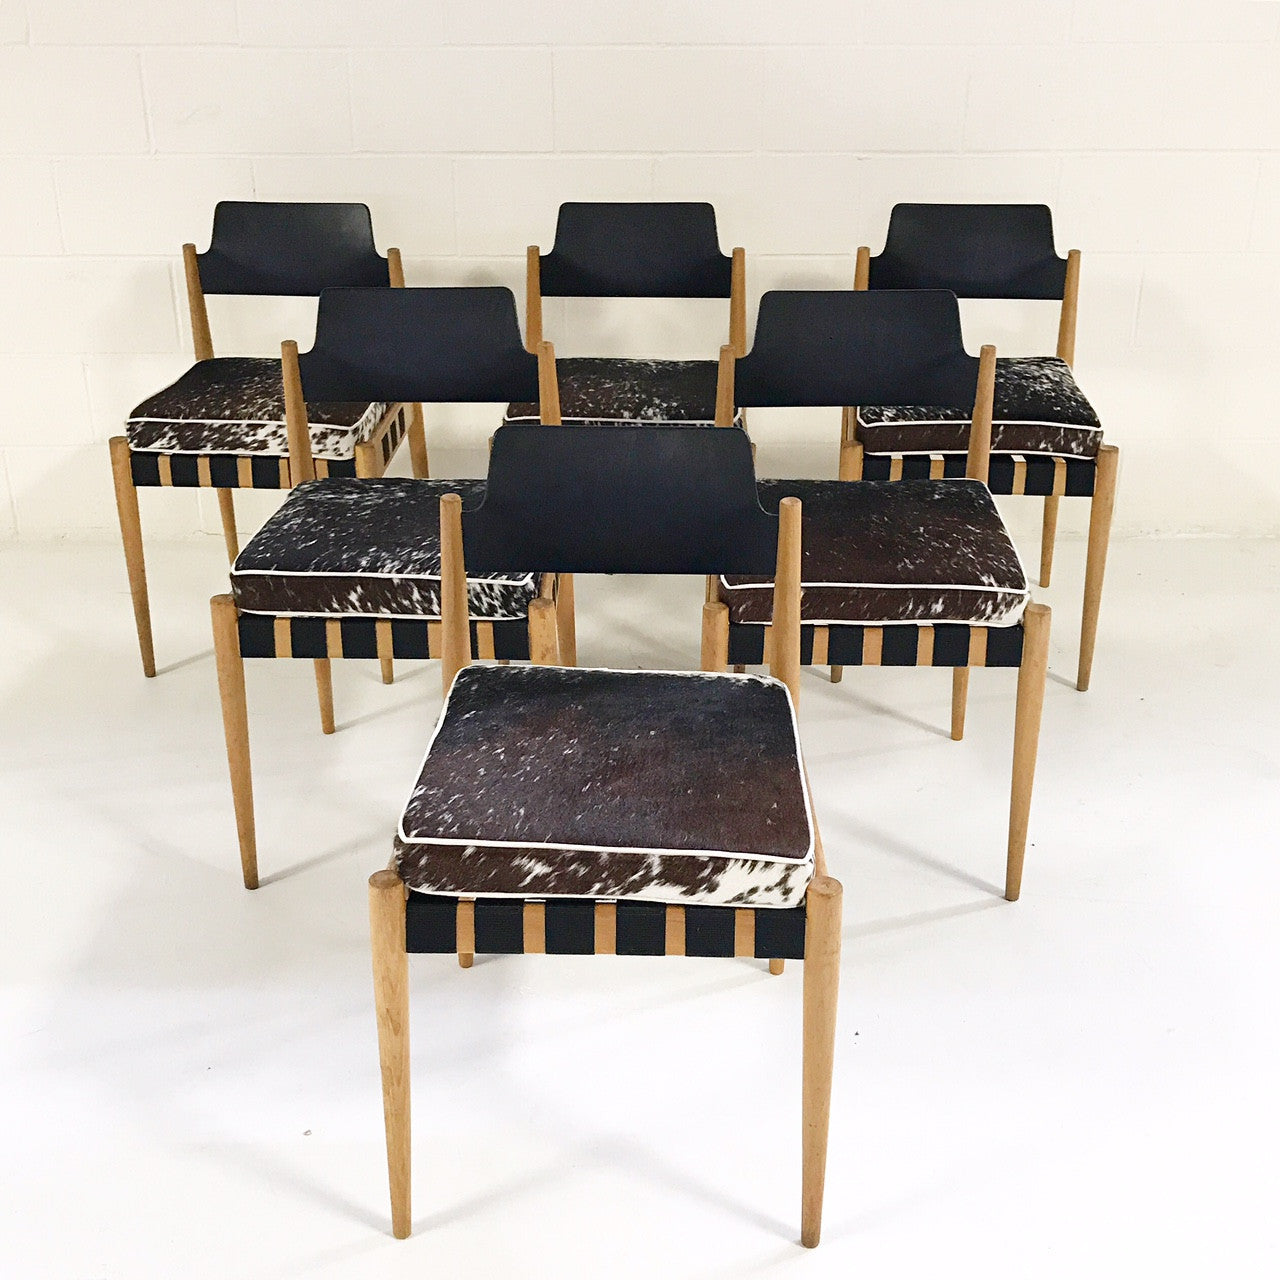 SE 120 Chairs with Custom Brazilian Cowhide Cushions, set of 6 - FORSYTH